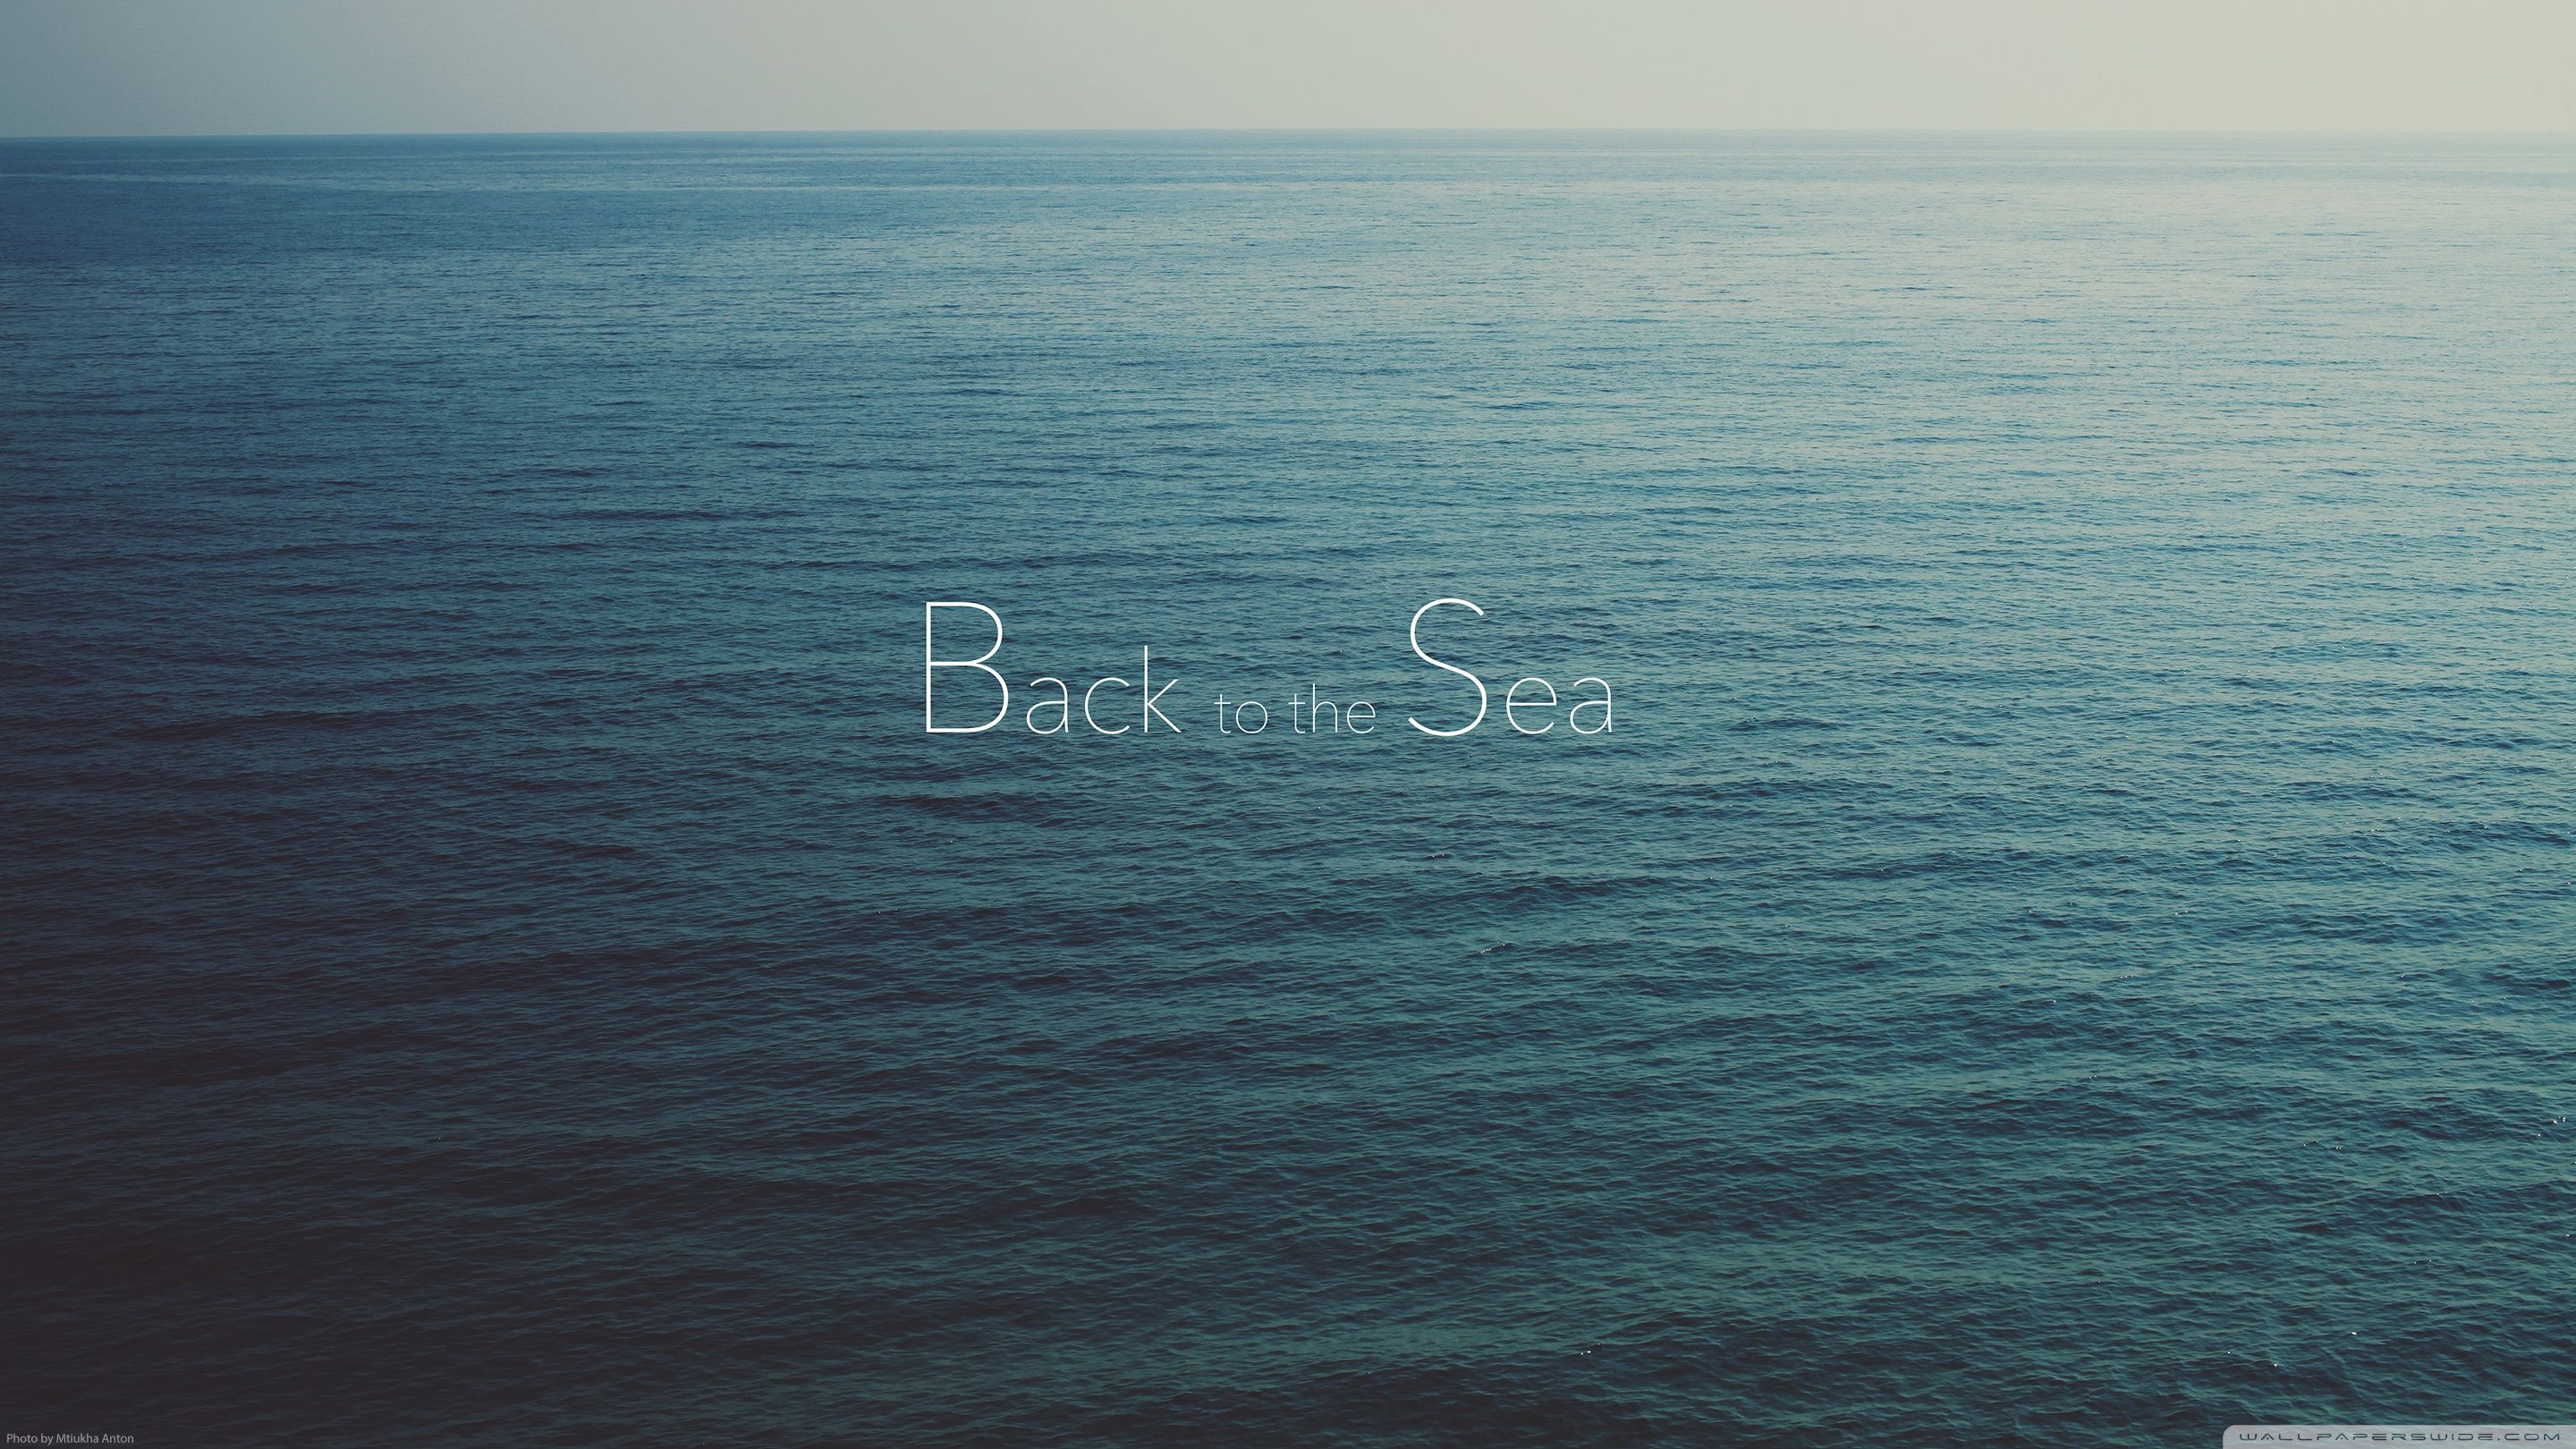 Back To The Sea Ultra HD Desktop Background Wallpaper for 4K UHD TV, Multi Display, Dual Monitor, Tablet